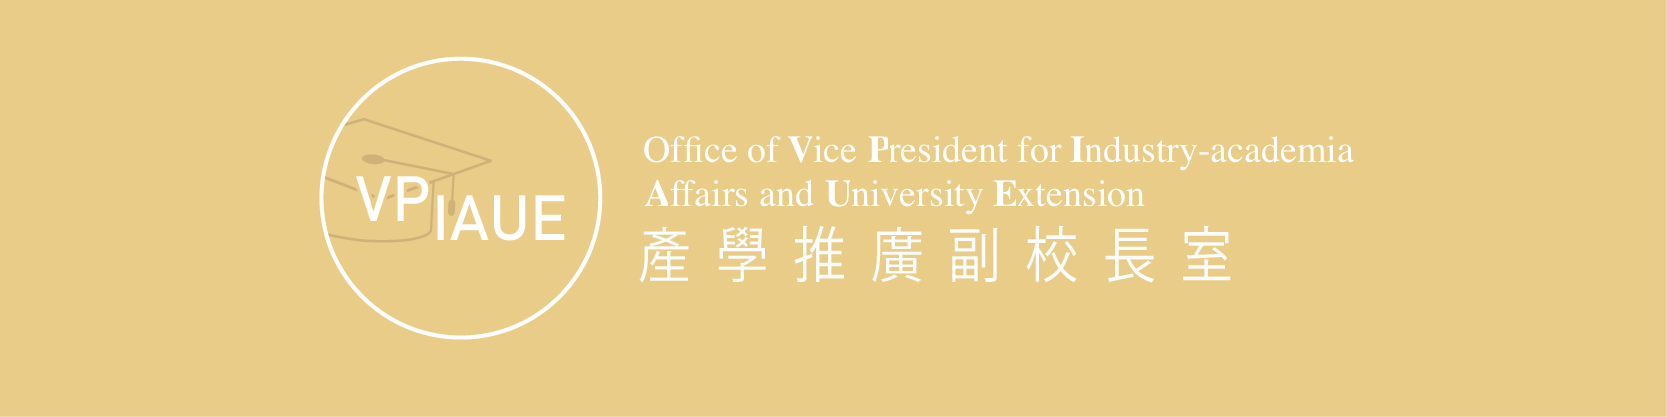 Office of Vice President for Industry-academia Affairs and University Extension - Ming Chuan University